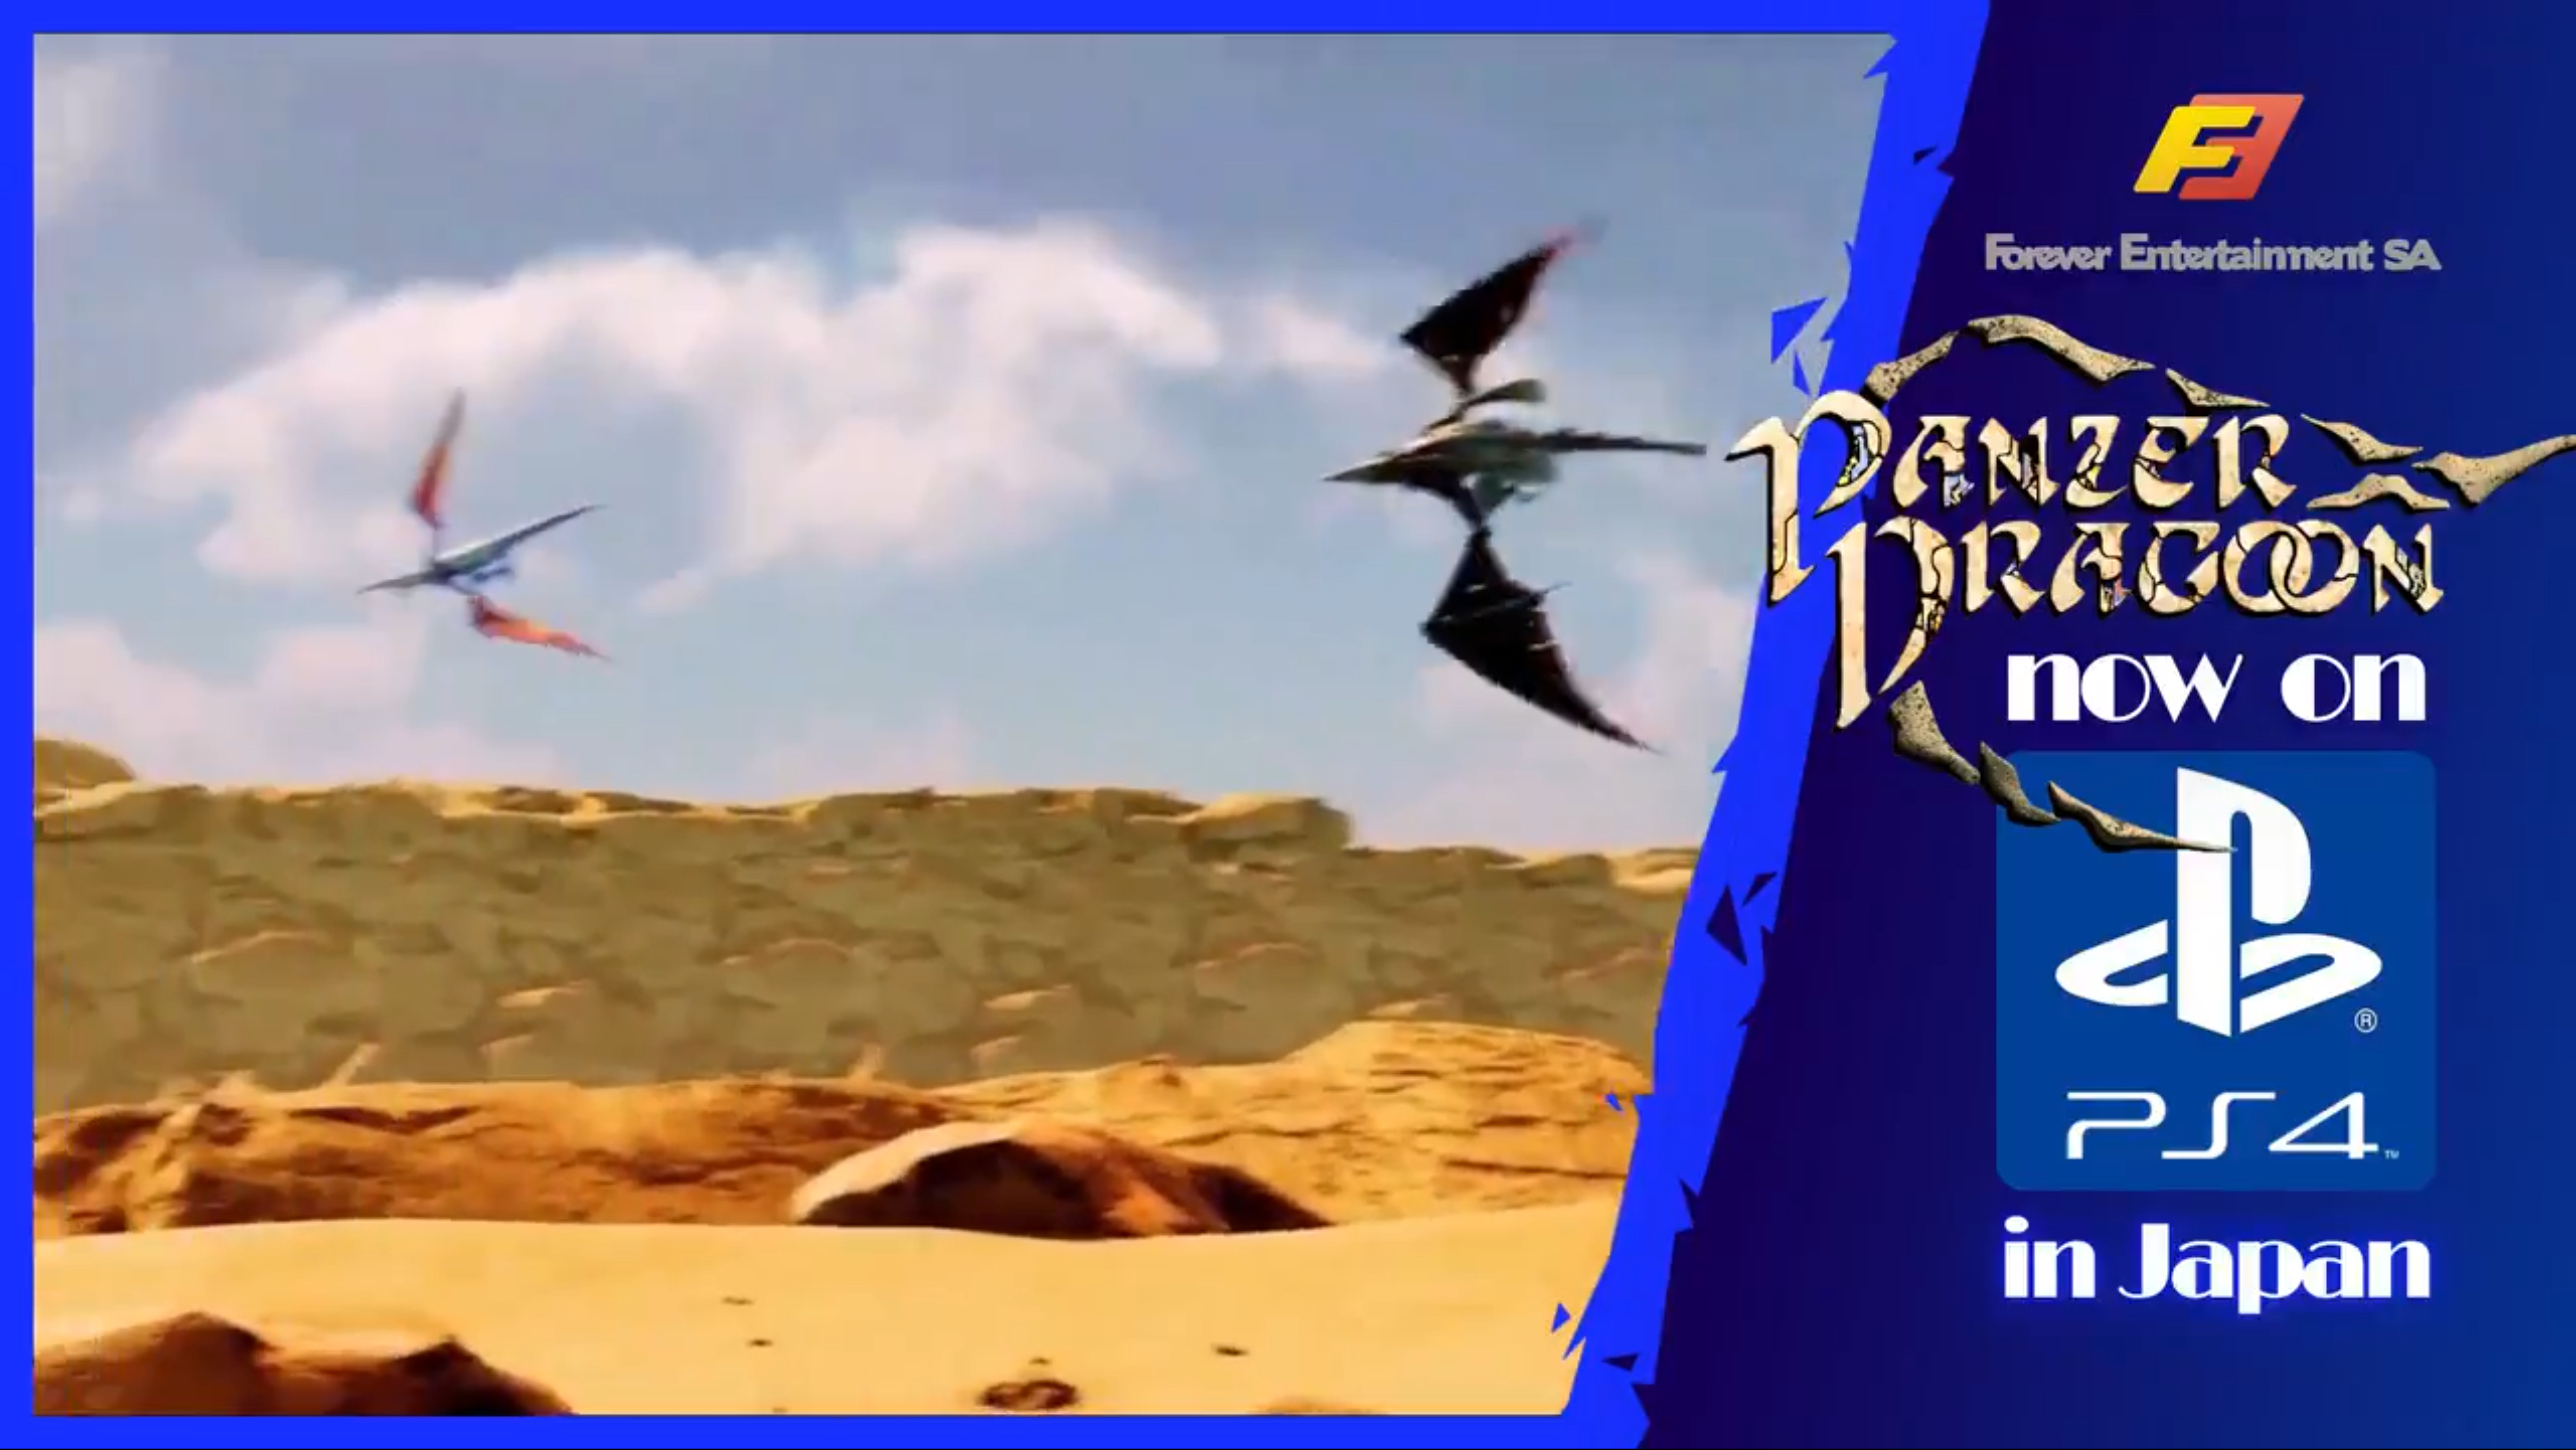 Panzer Dragoon: Remake Launches on PS4 in Japan As We Celebrate the Game's 1st Anniversary